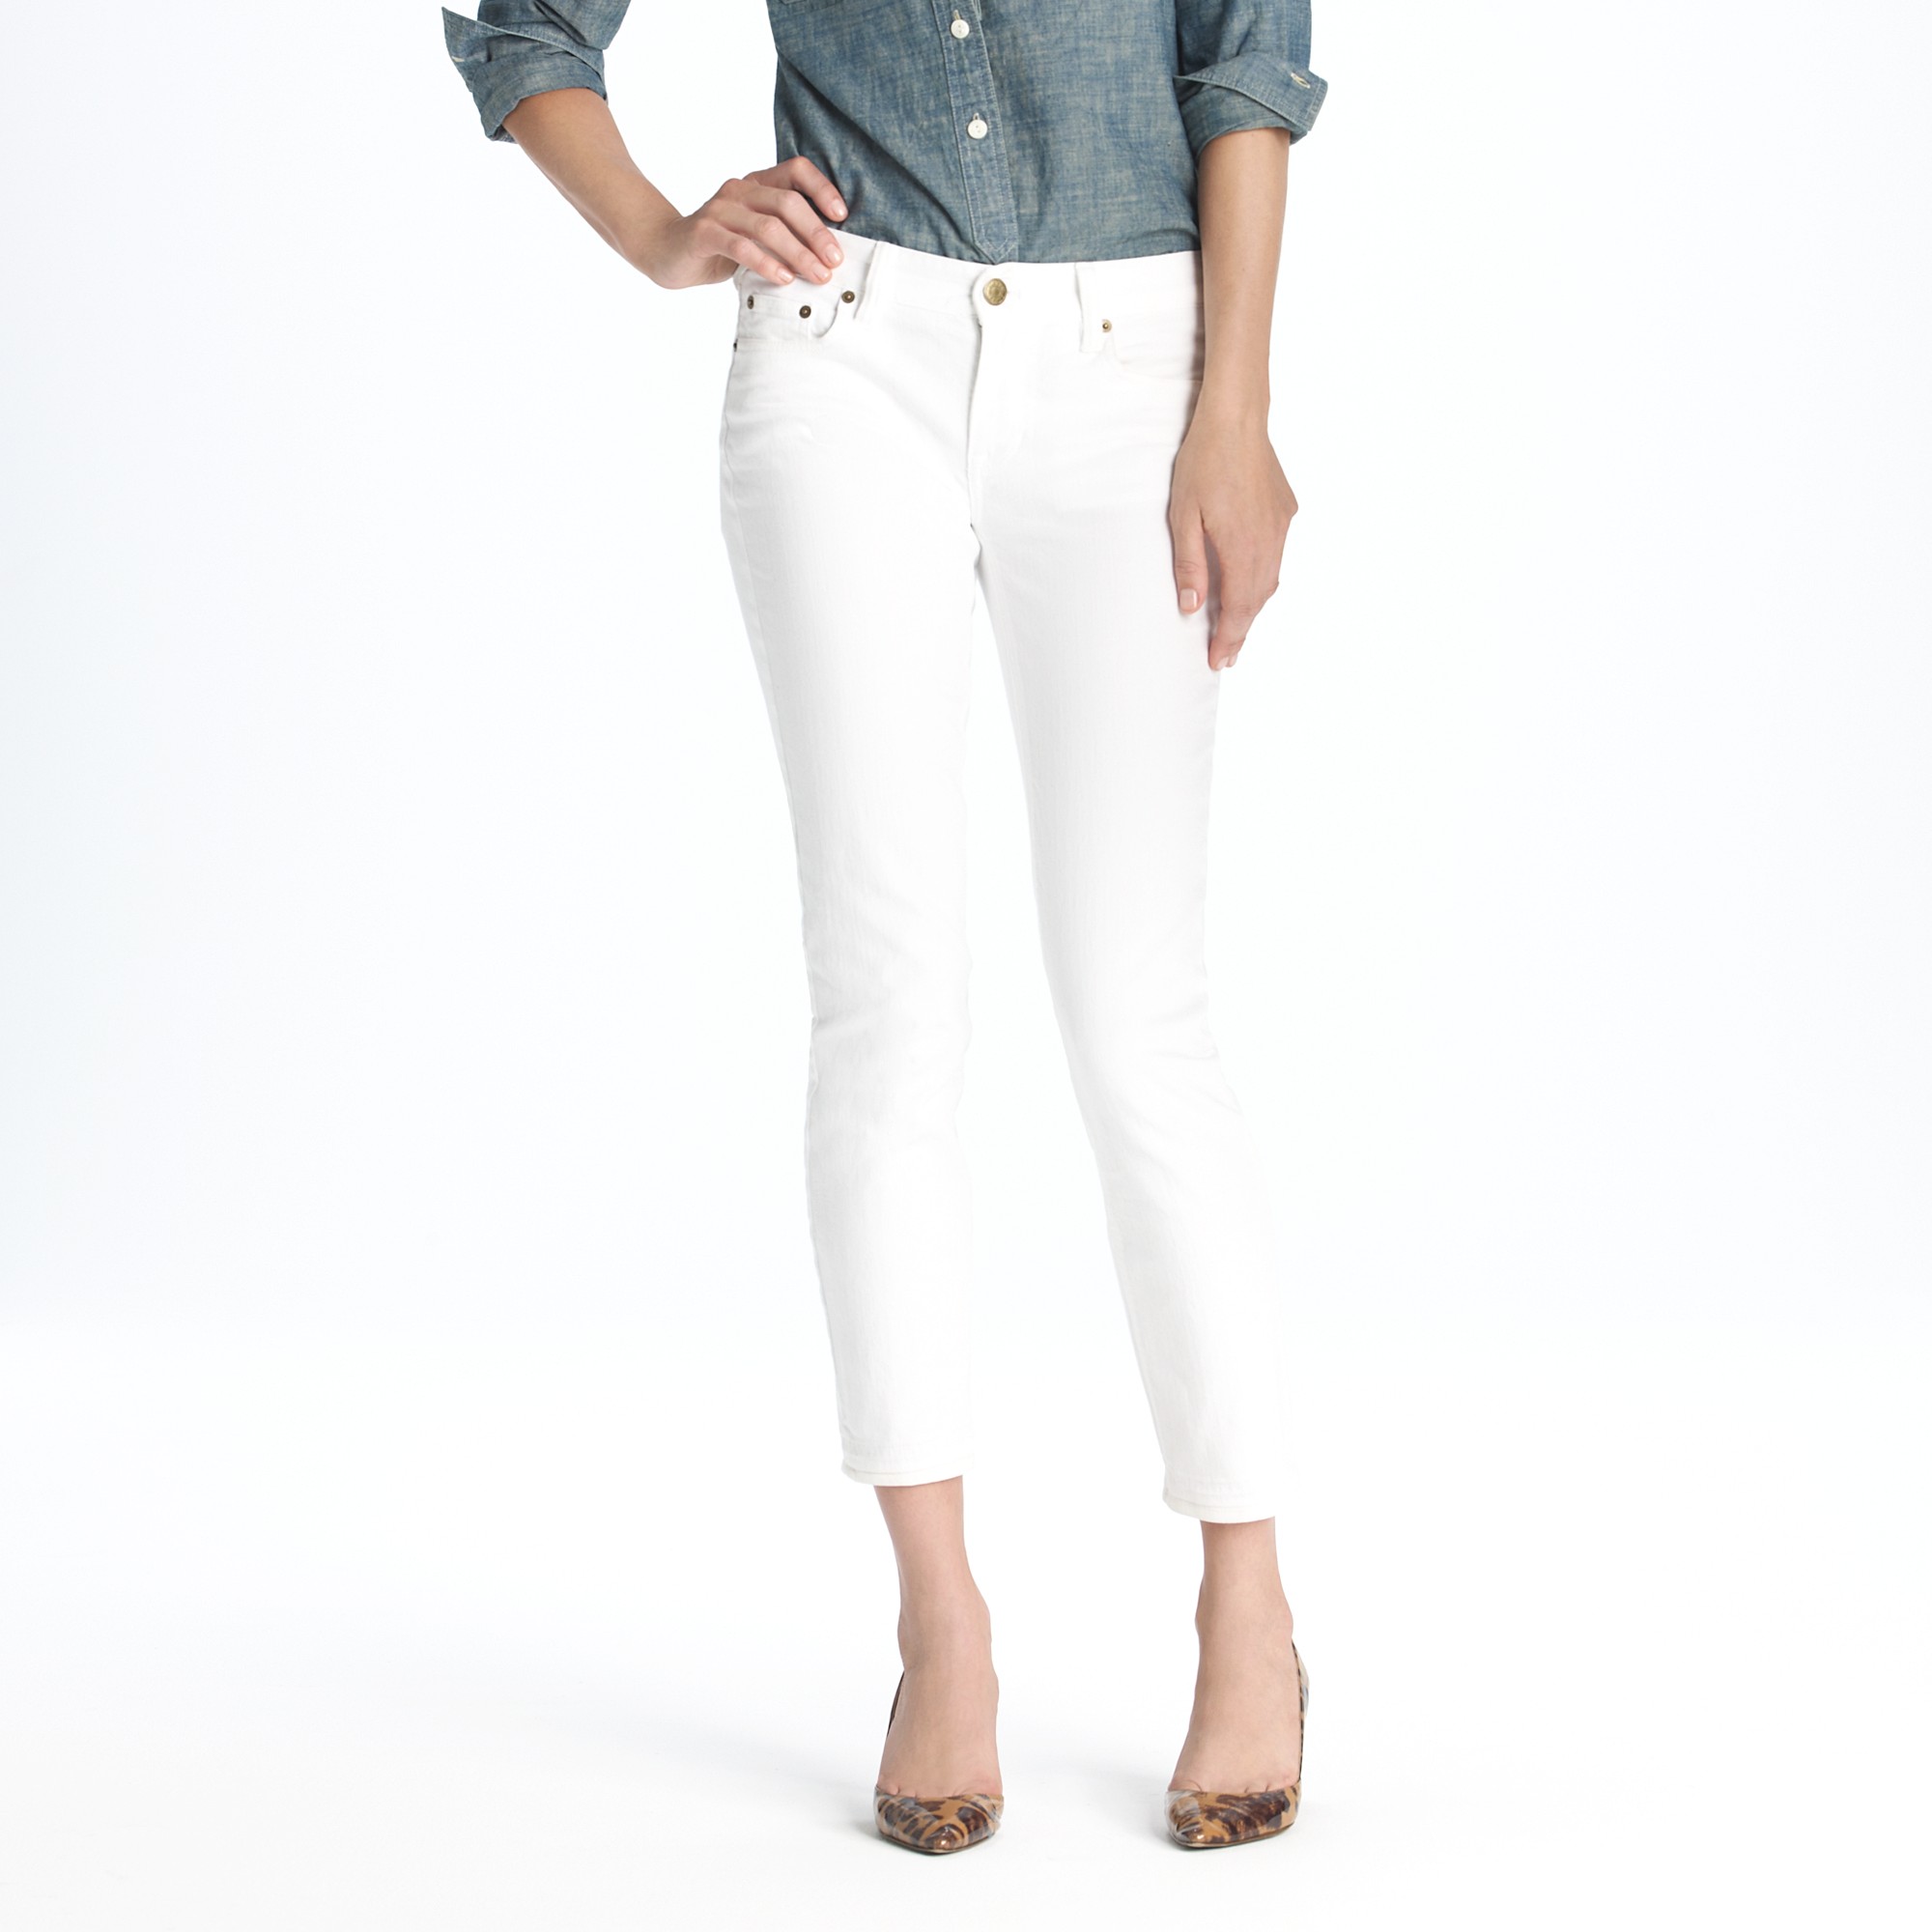 Lyst - J.Crew Cropped Matchstick Jean in White in White